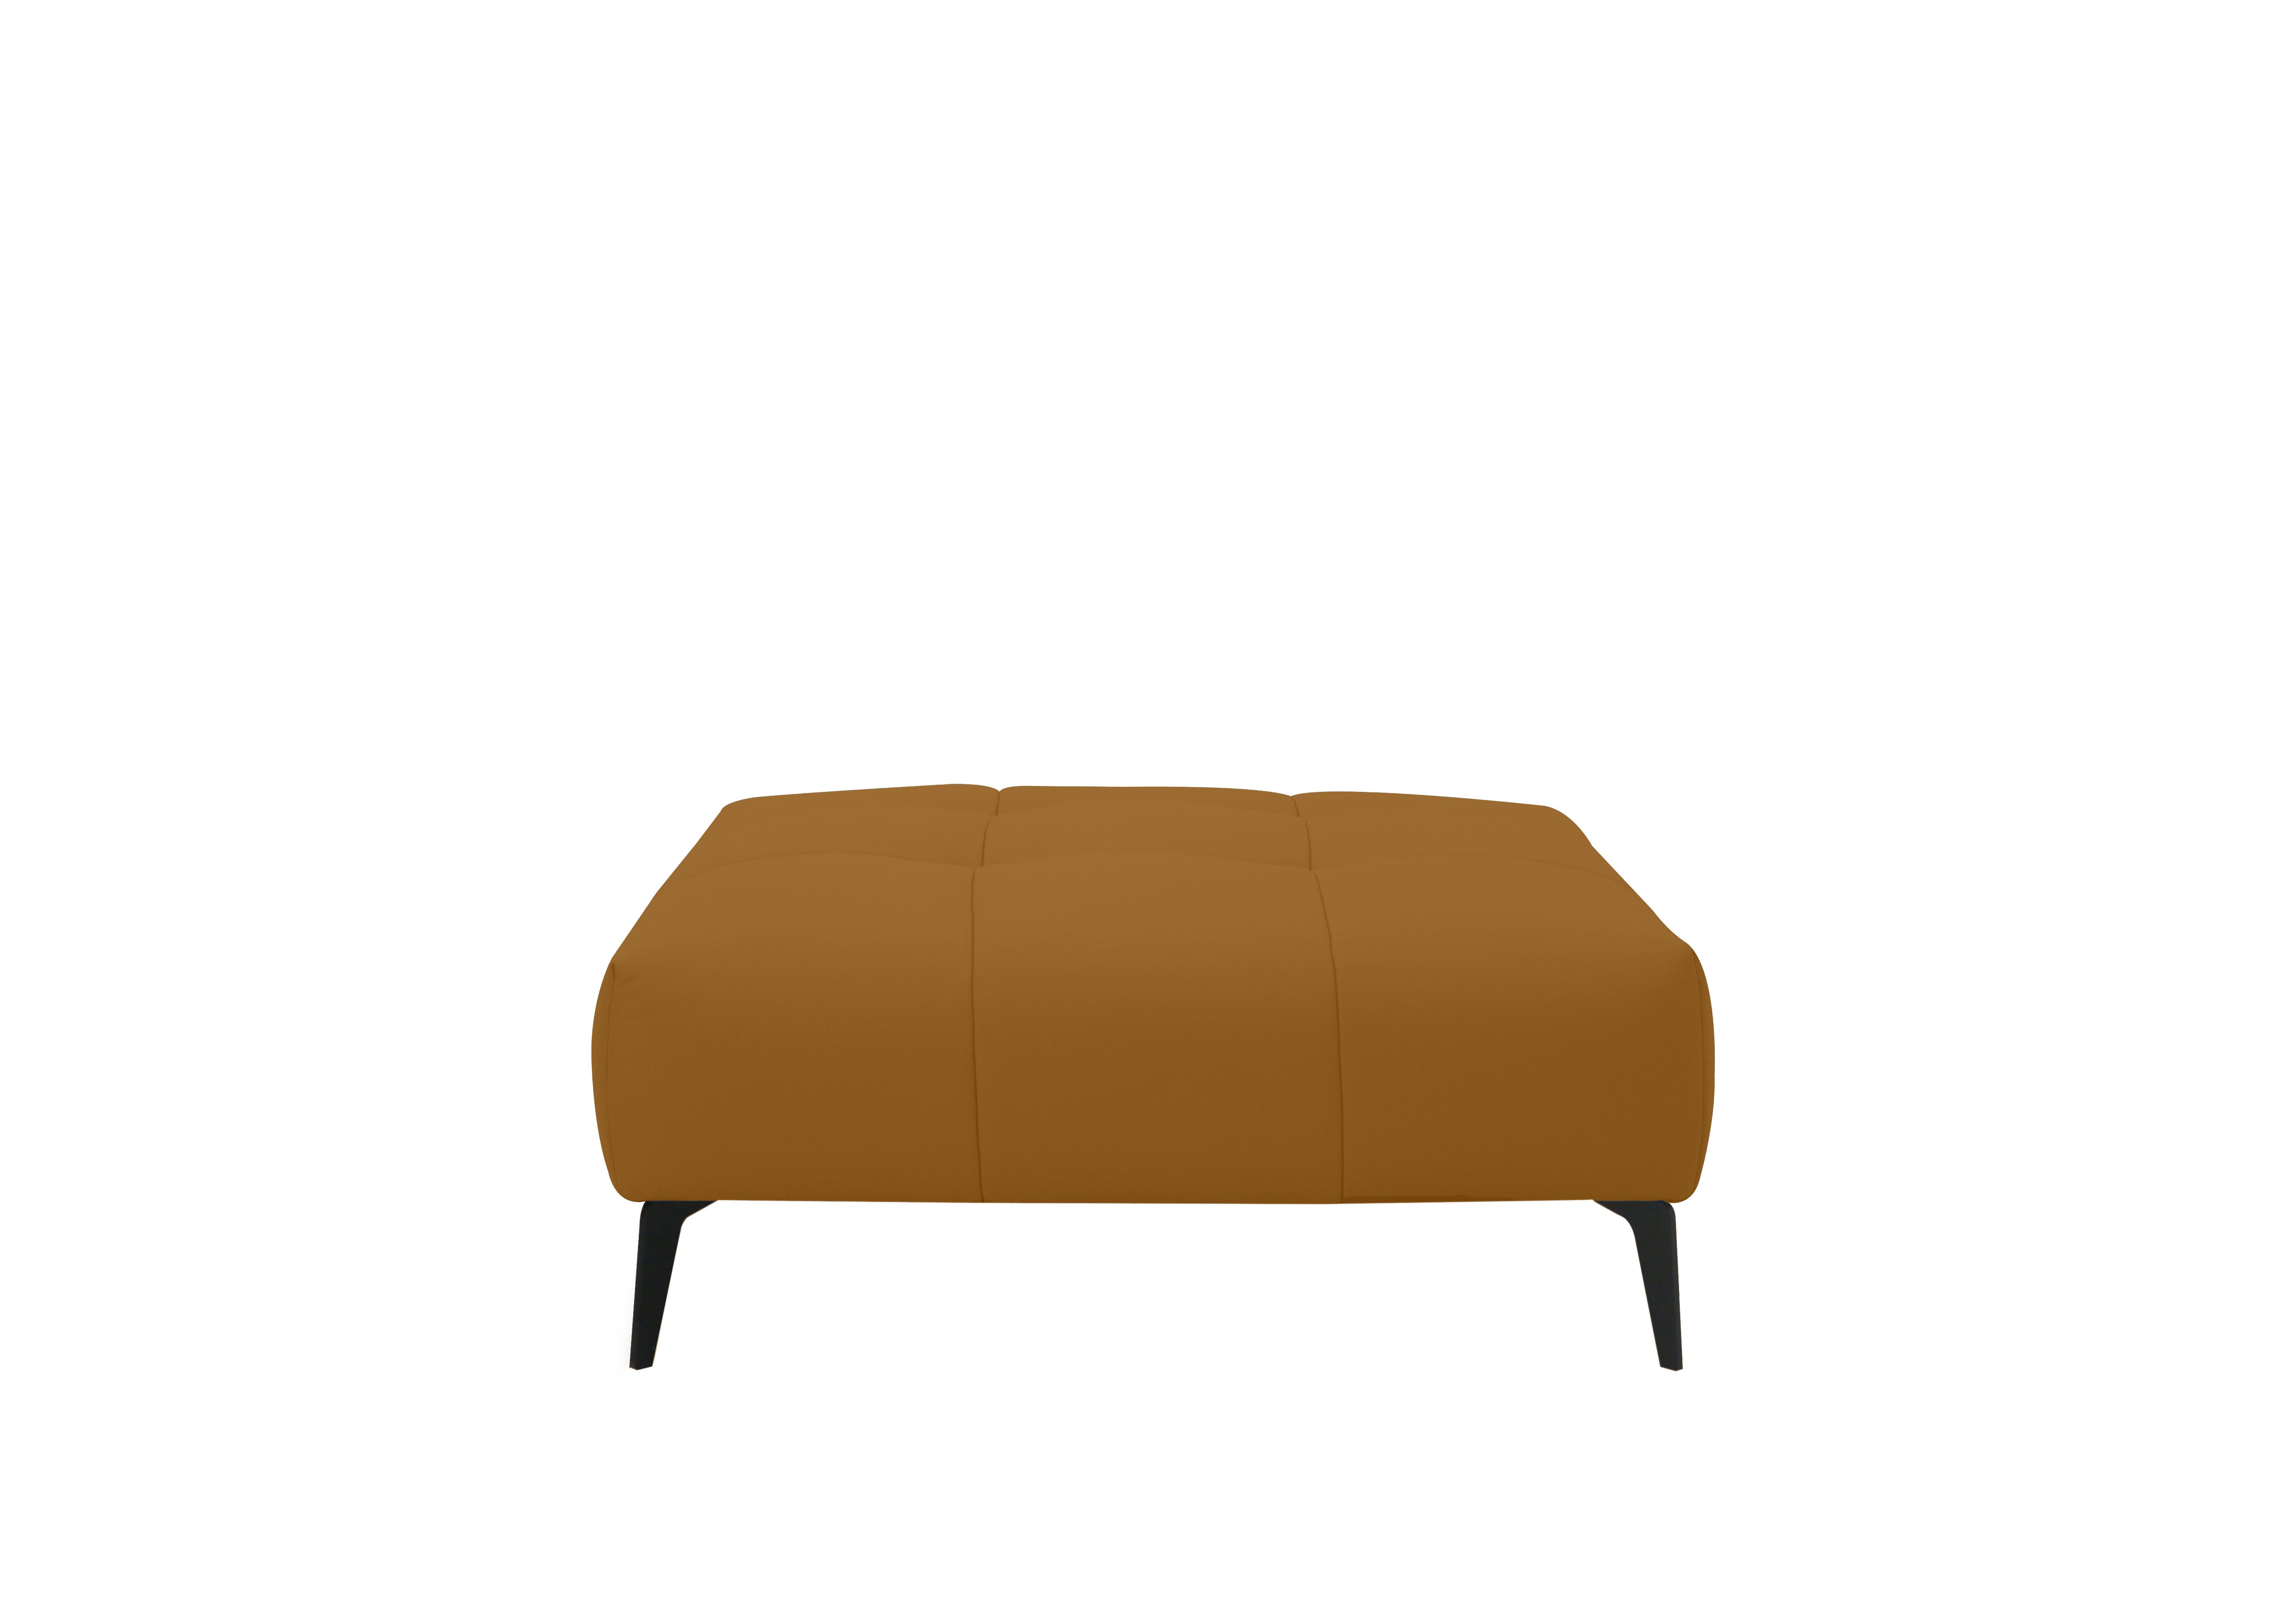 Lawson Leather Footstool in Np-606e Honey Yellow on Furniture Village